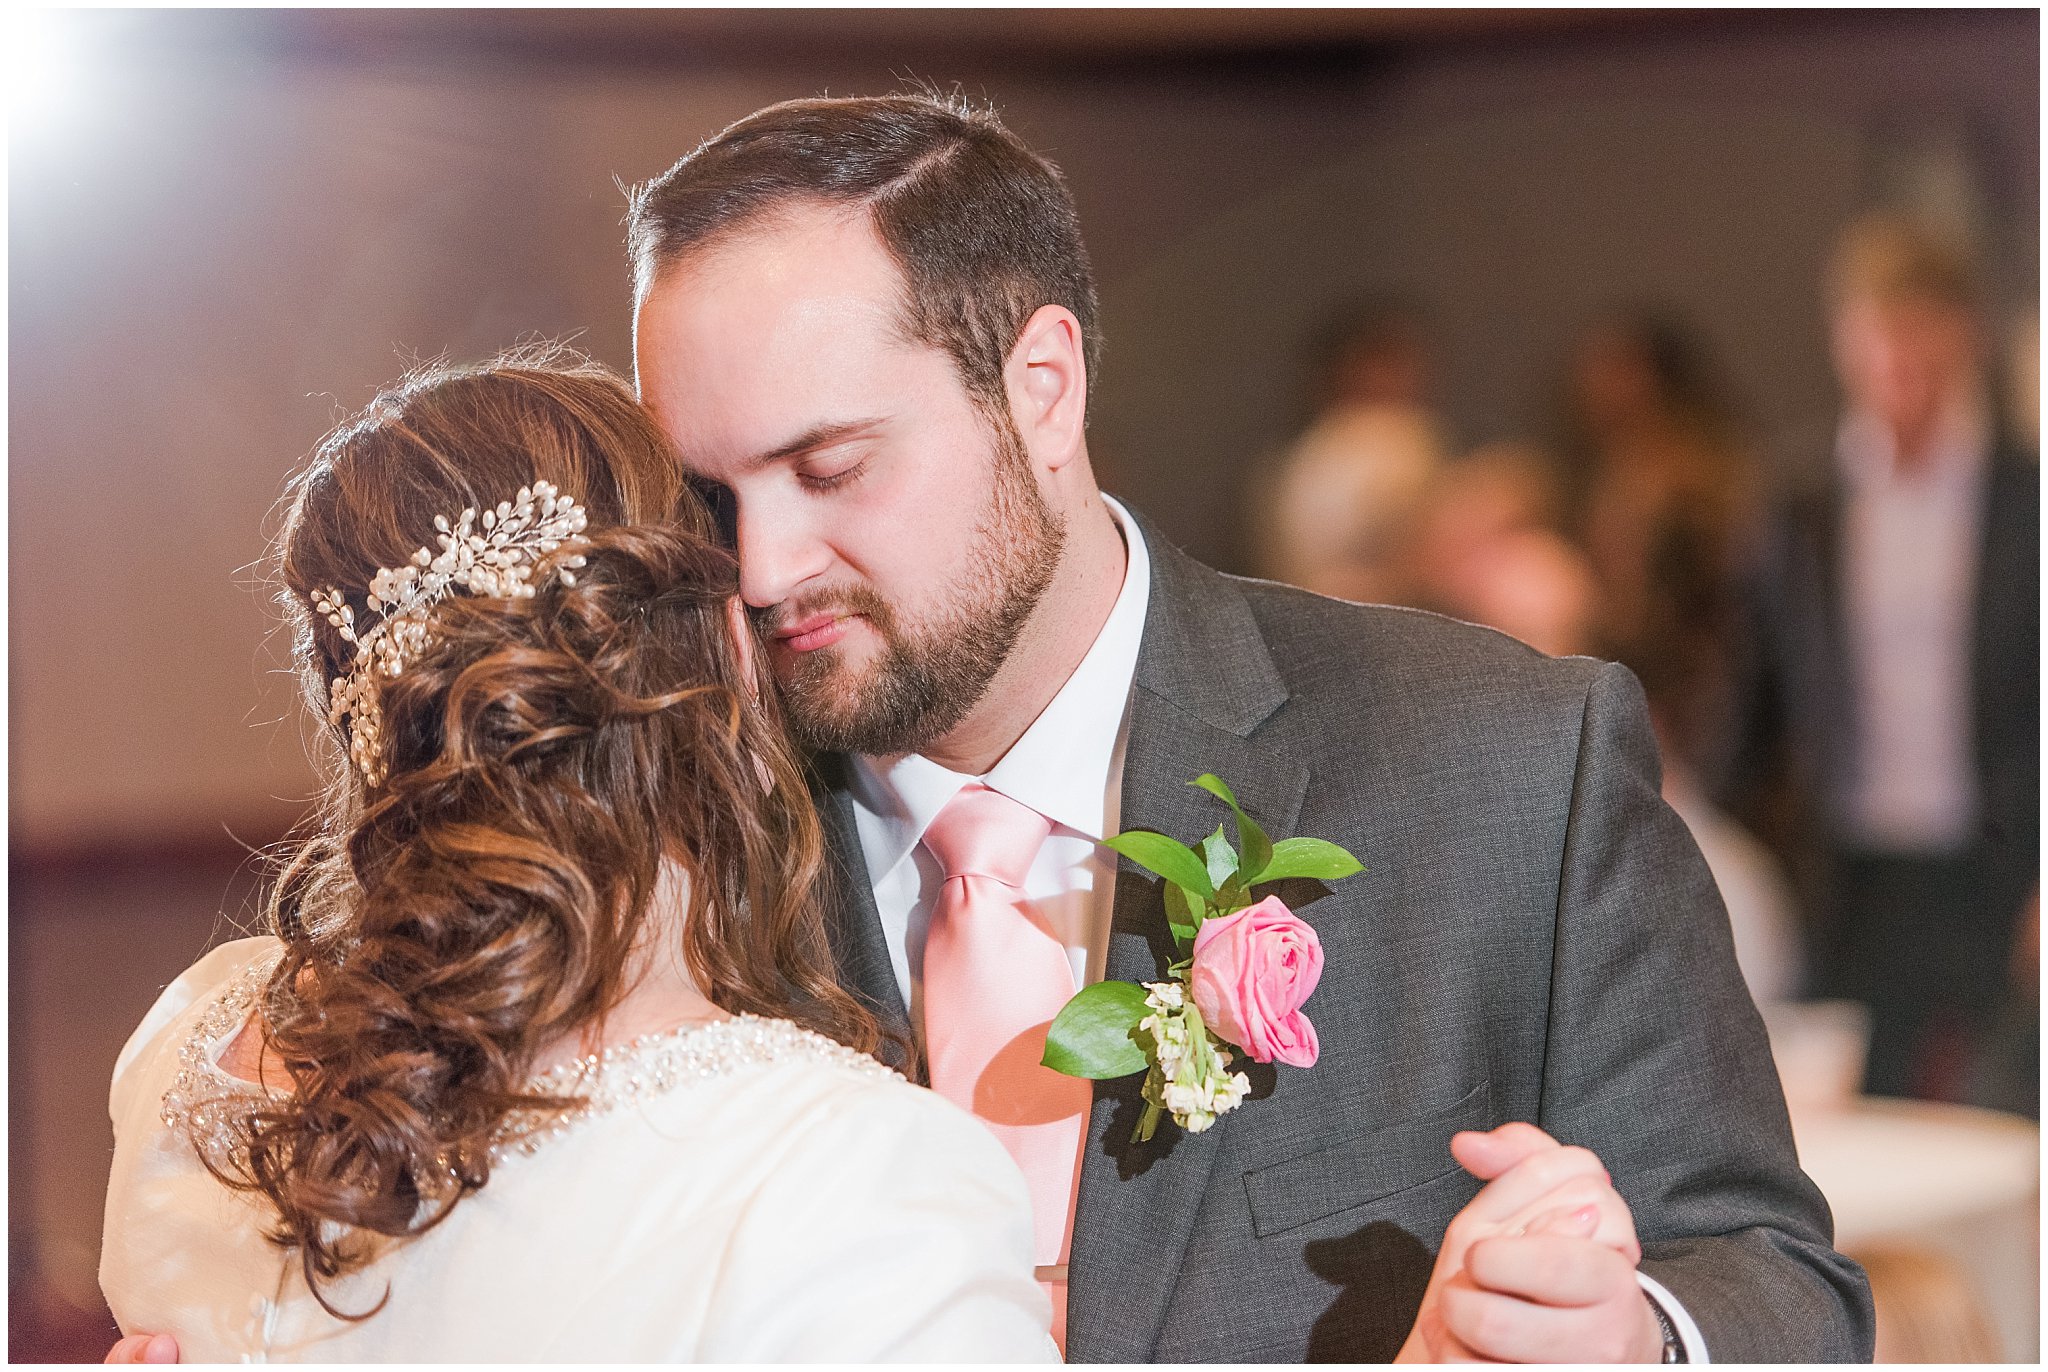 Emotional moment during bride and groom first dance | Top Utah Wedding and Couples Photos 2019 | Jessie and Dallin Photography